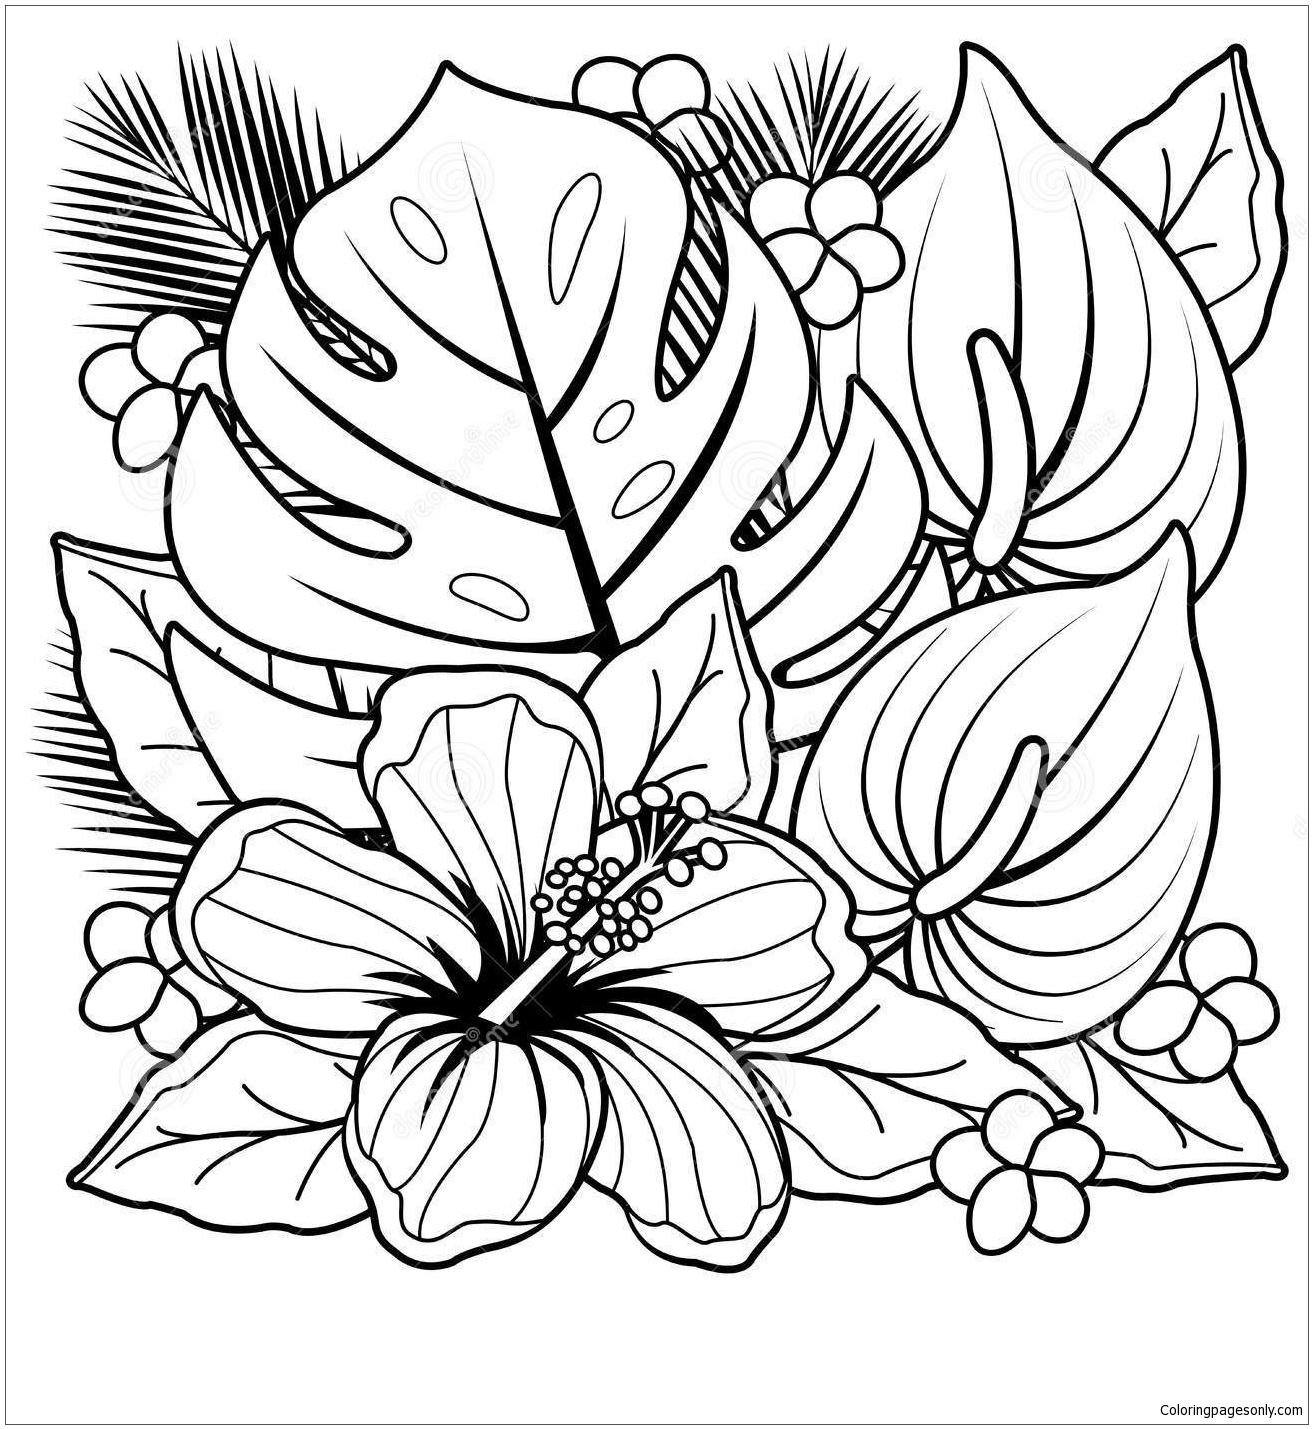 parts-of-plant-coloring-page-coloring-pages